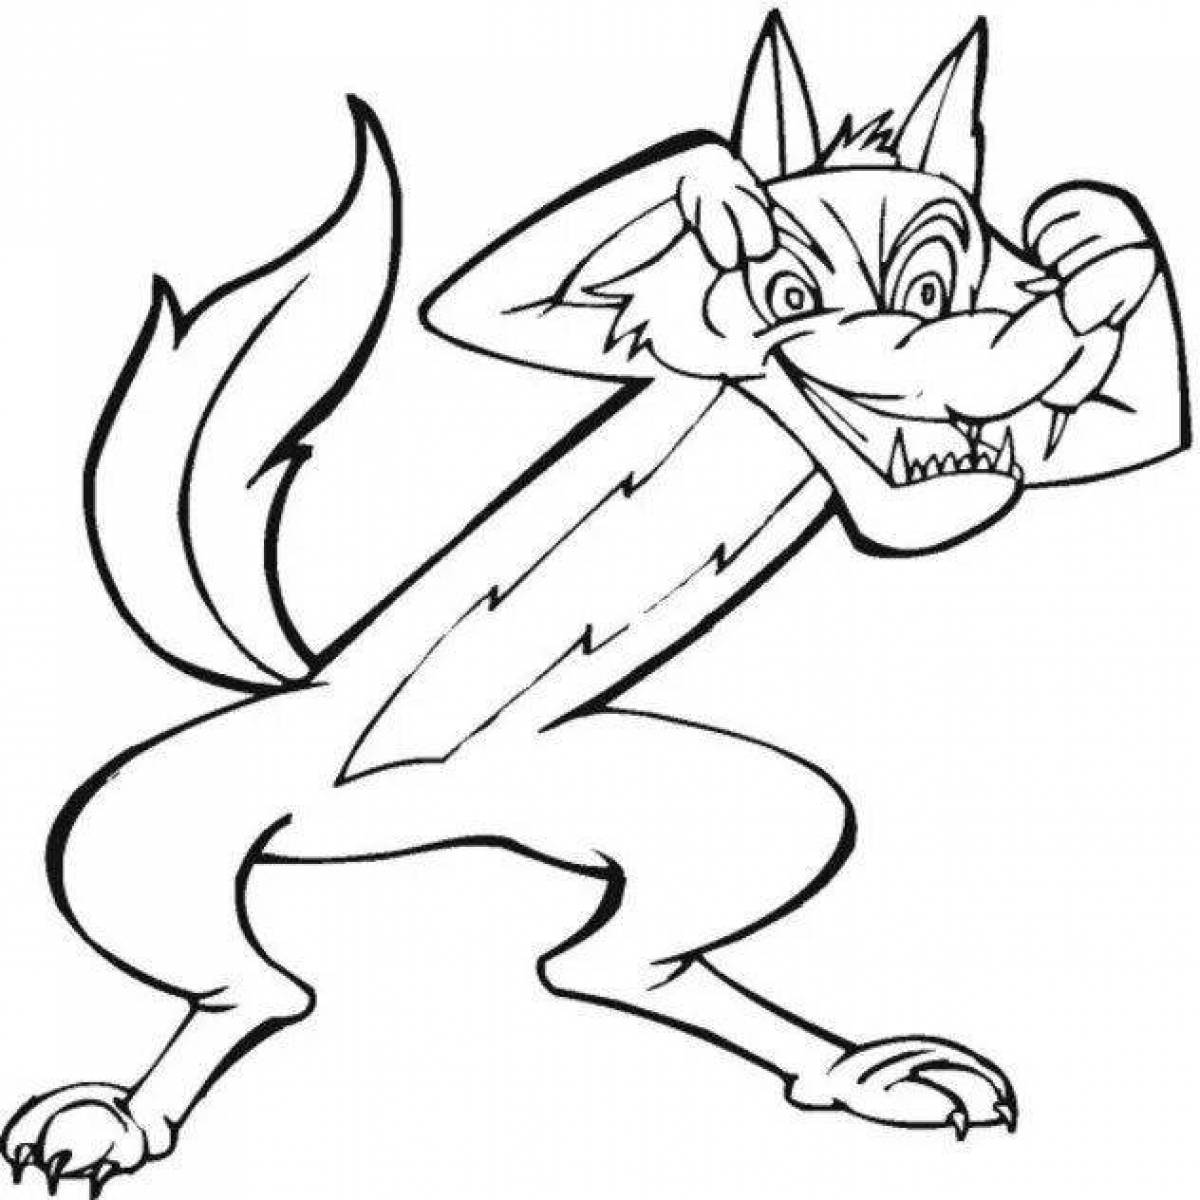 Coloring page shocking angry wolf